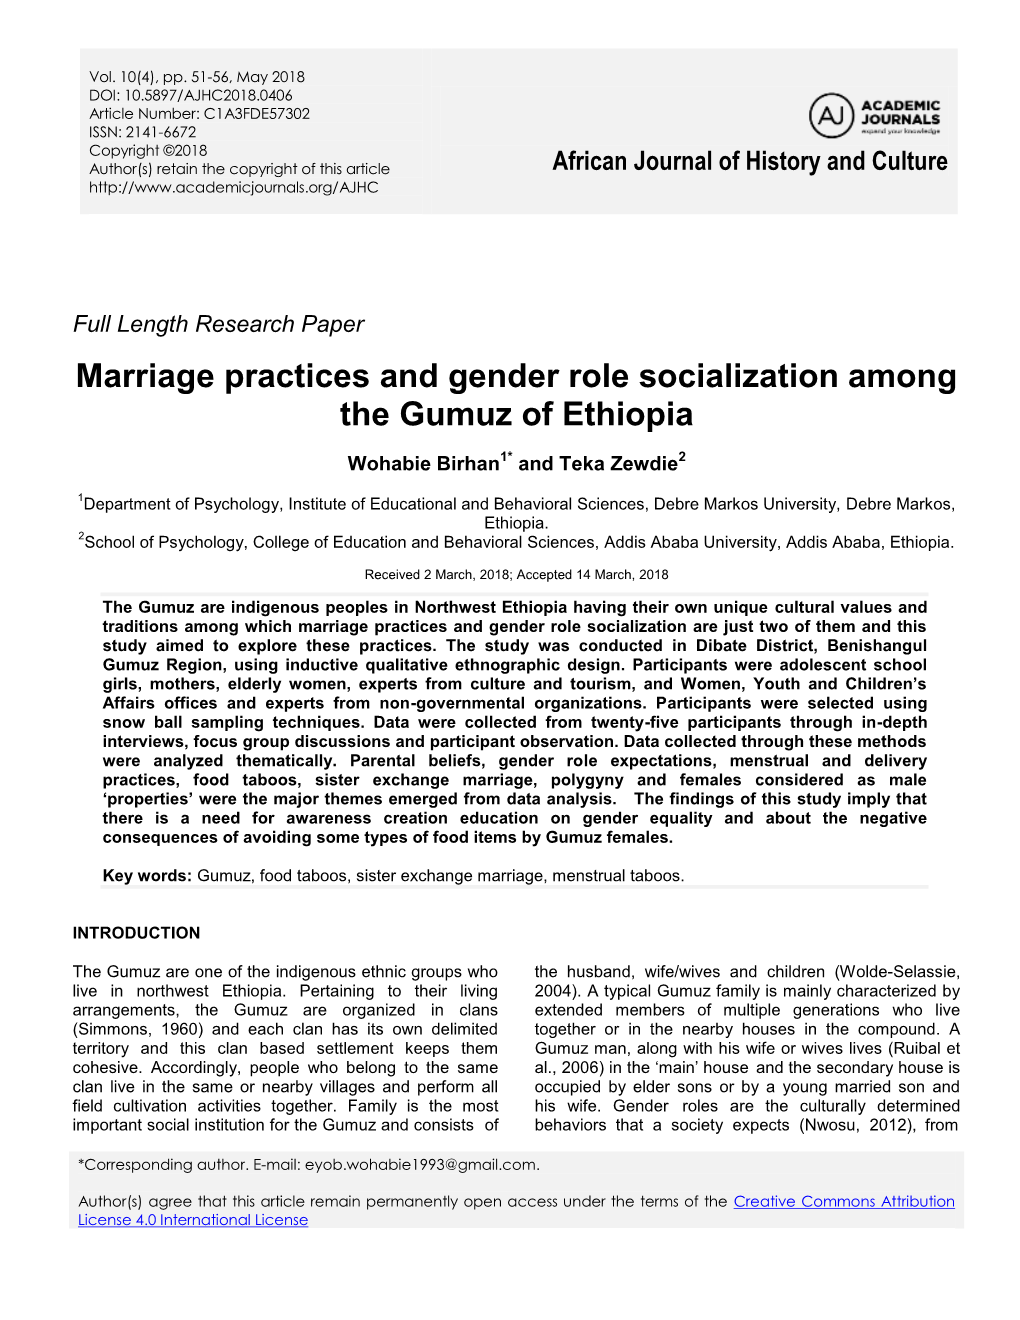 Marriage Practices and Gender Role Socialization Among the Gumuz of Ethiopia